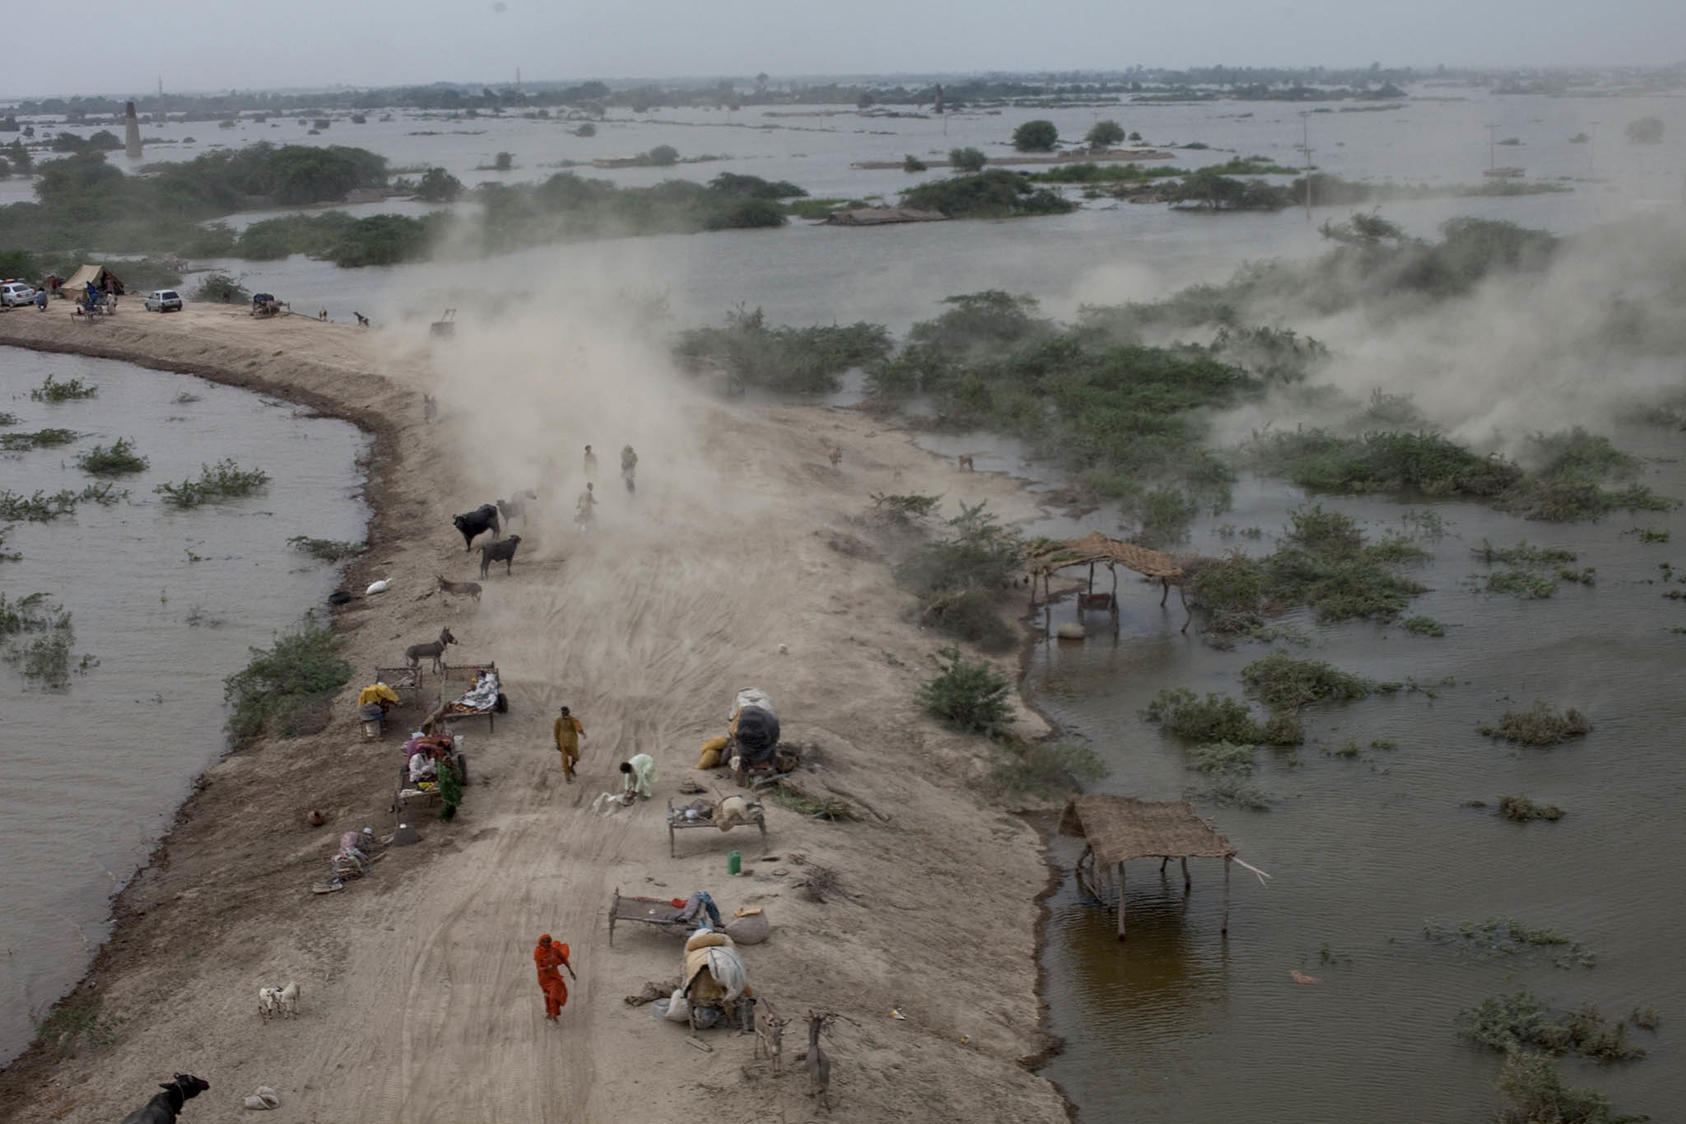 After evacuating the town of Sujawal from rising floodwater, displaced Pakistanis seek refuge on a narrow strip of land outside of the town where food and medical supplies are limited, in Pakistan, Aug. 29, 2010. (Tyler Hicks/The New York Times)